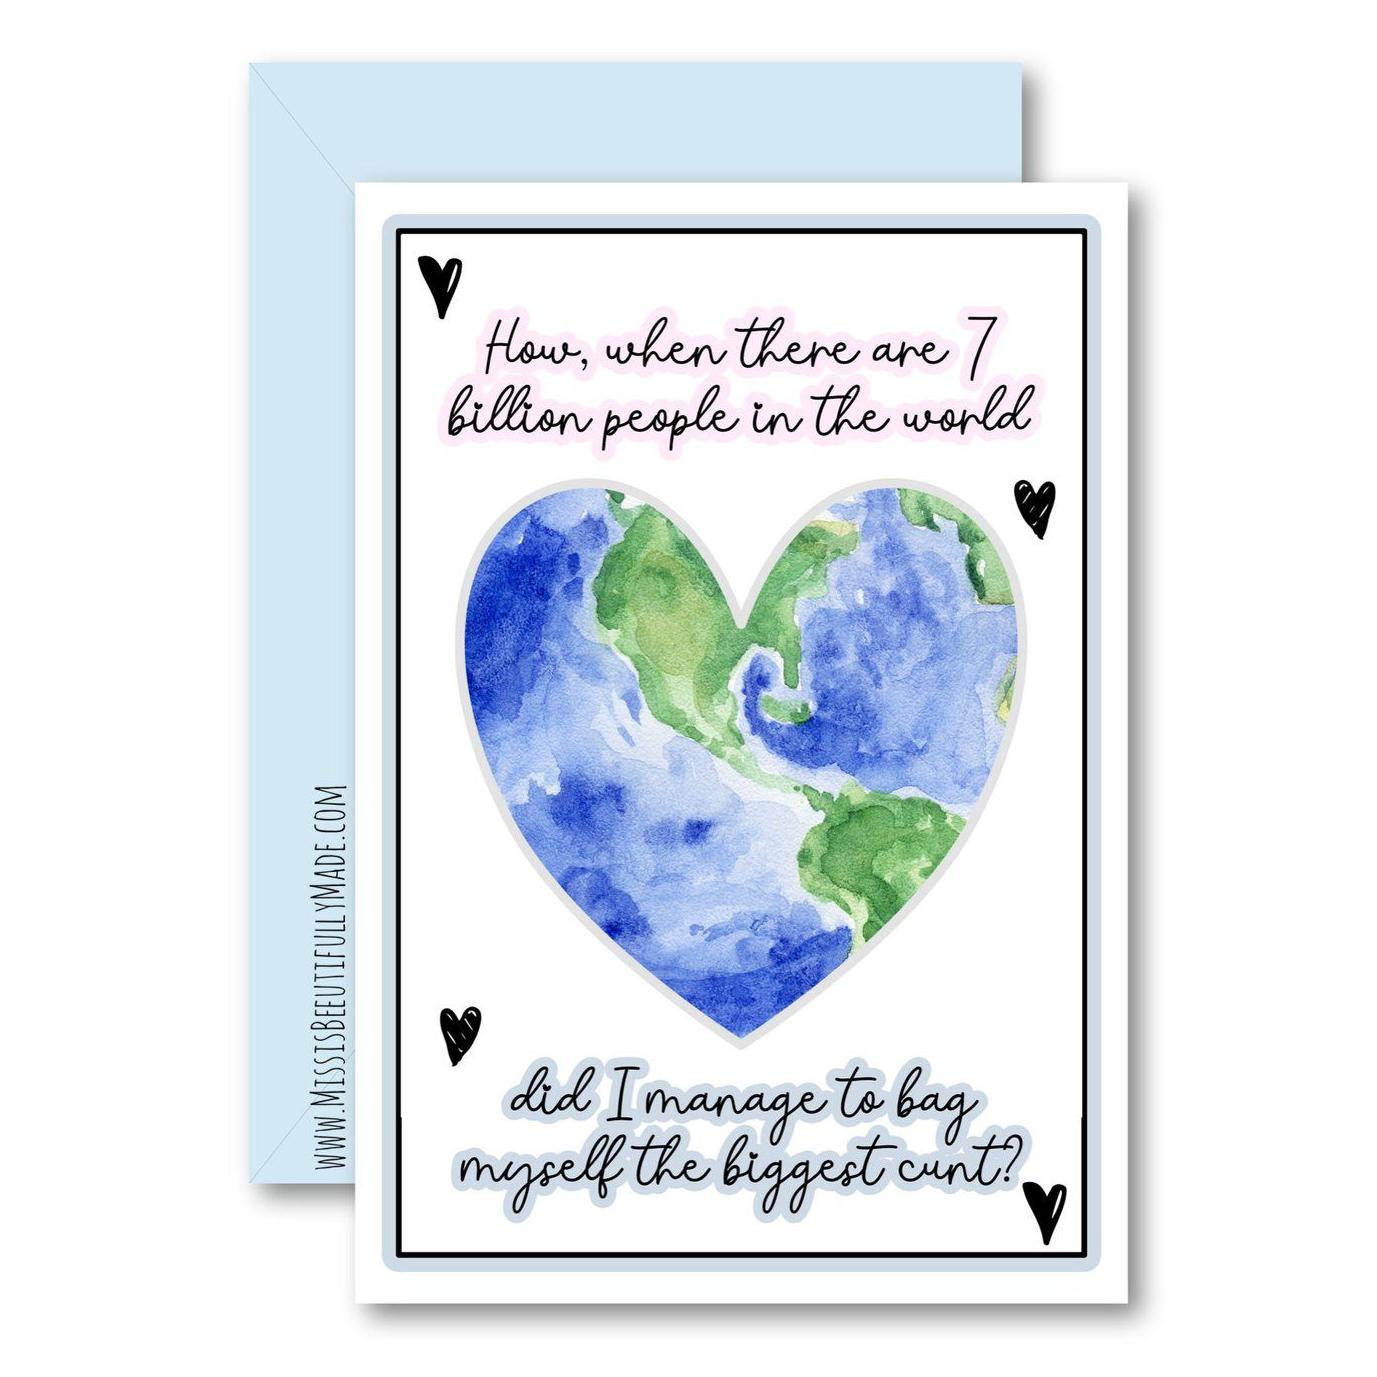 A white vertical greetings card with a heart shape drawing of the world. To the top of the card it reads 'how, when there are 7 billion people in the world', and to the bottom it continues '...did i manage to bag myself the cunt?'.